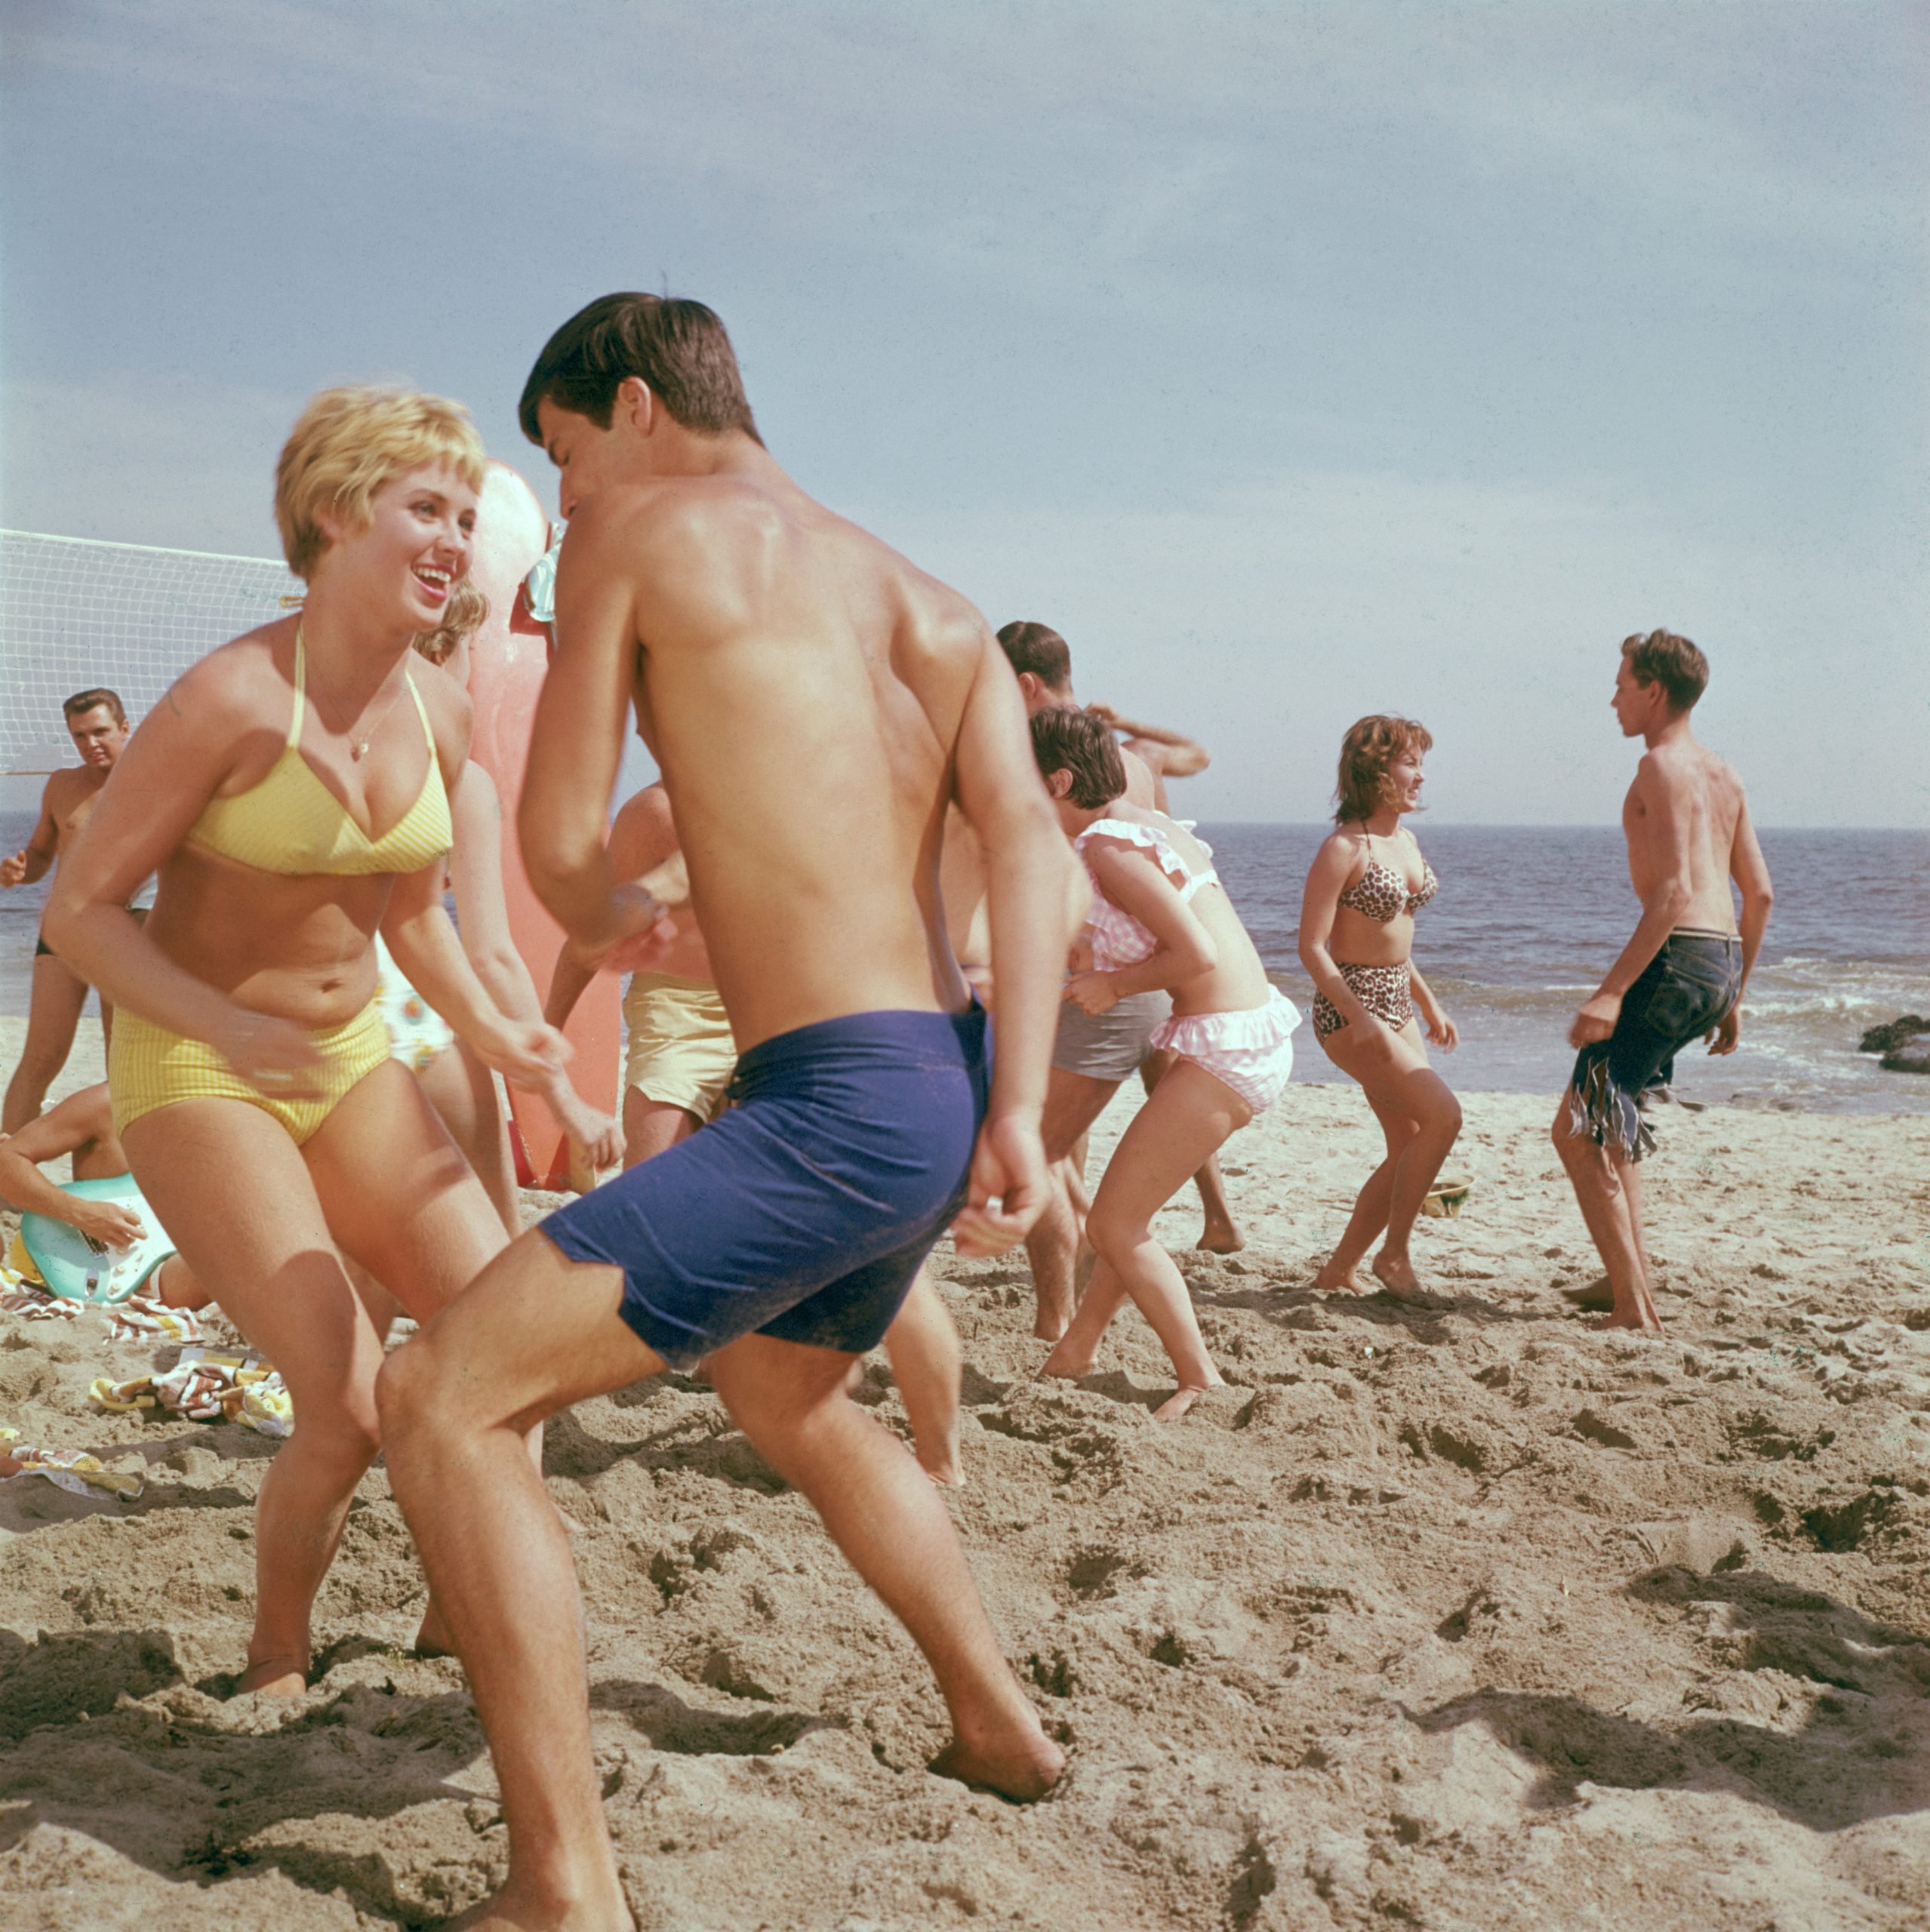 people dancing on a beach 1960s